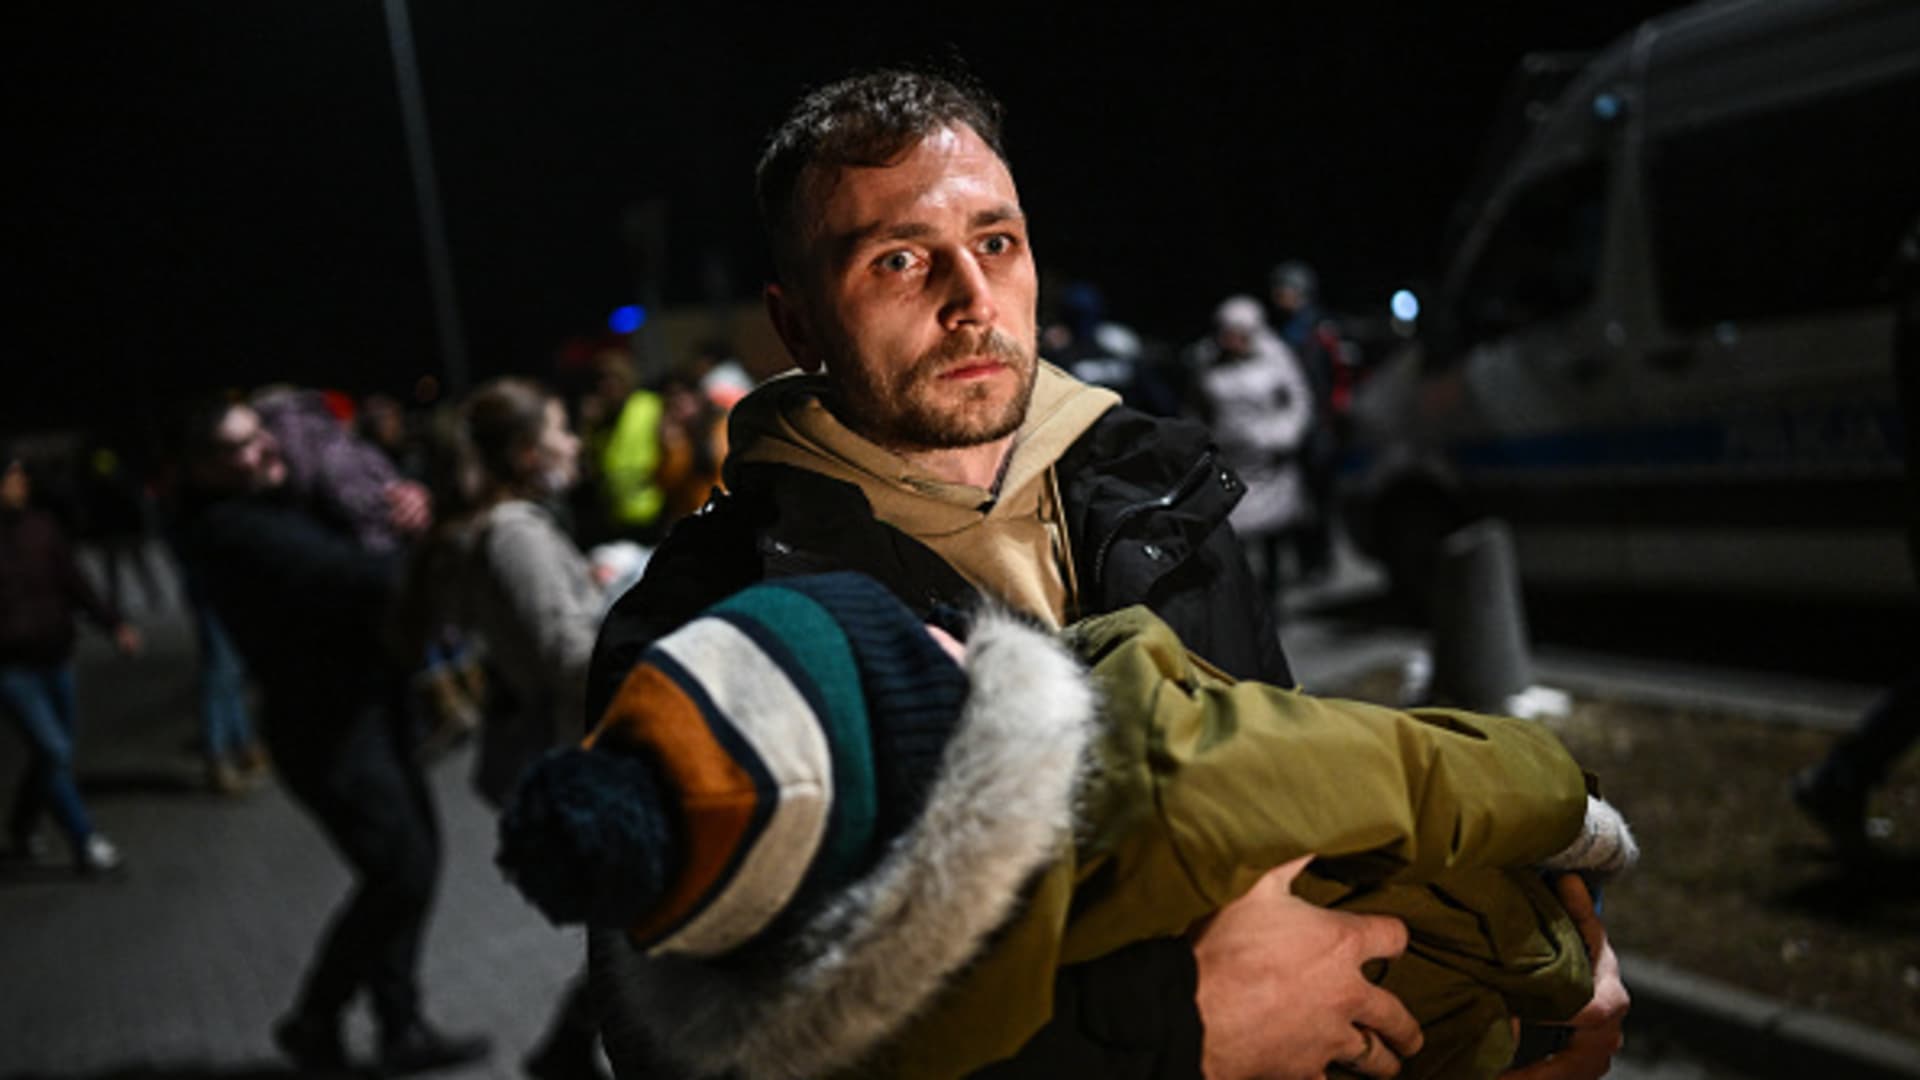 A man holds a sleeping baby after arriving by bus to a supermarket parking lot from the Polish-Ukrainian border crossing on February 25, 2022 in Przemysl, Poland.